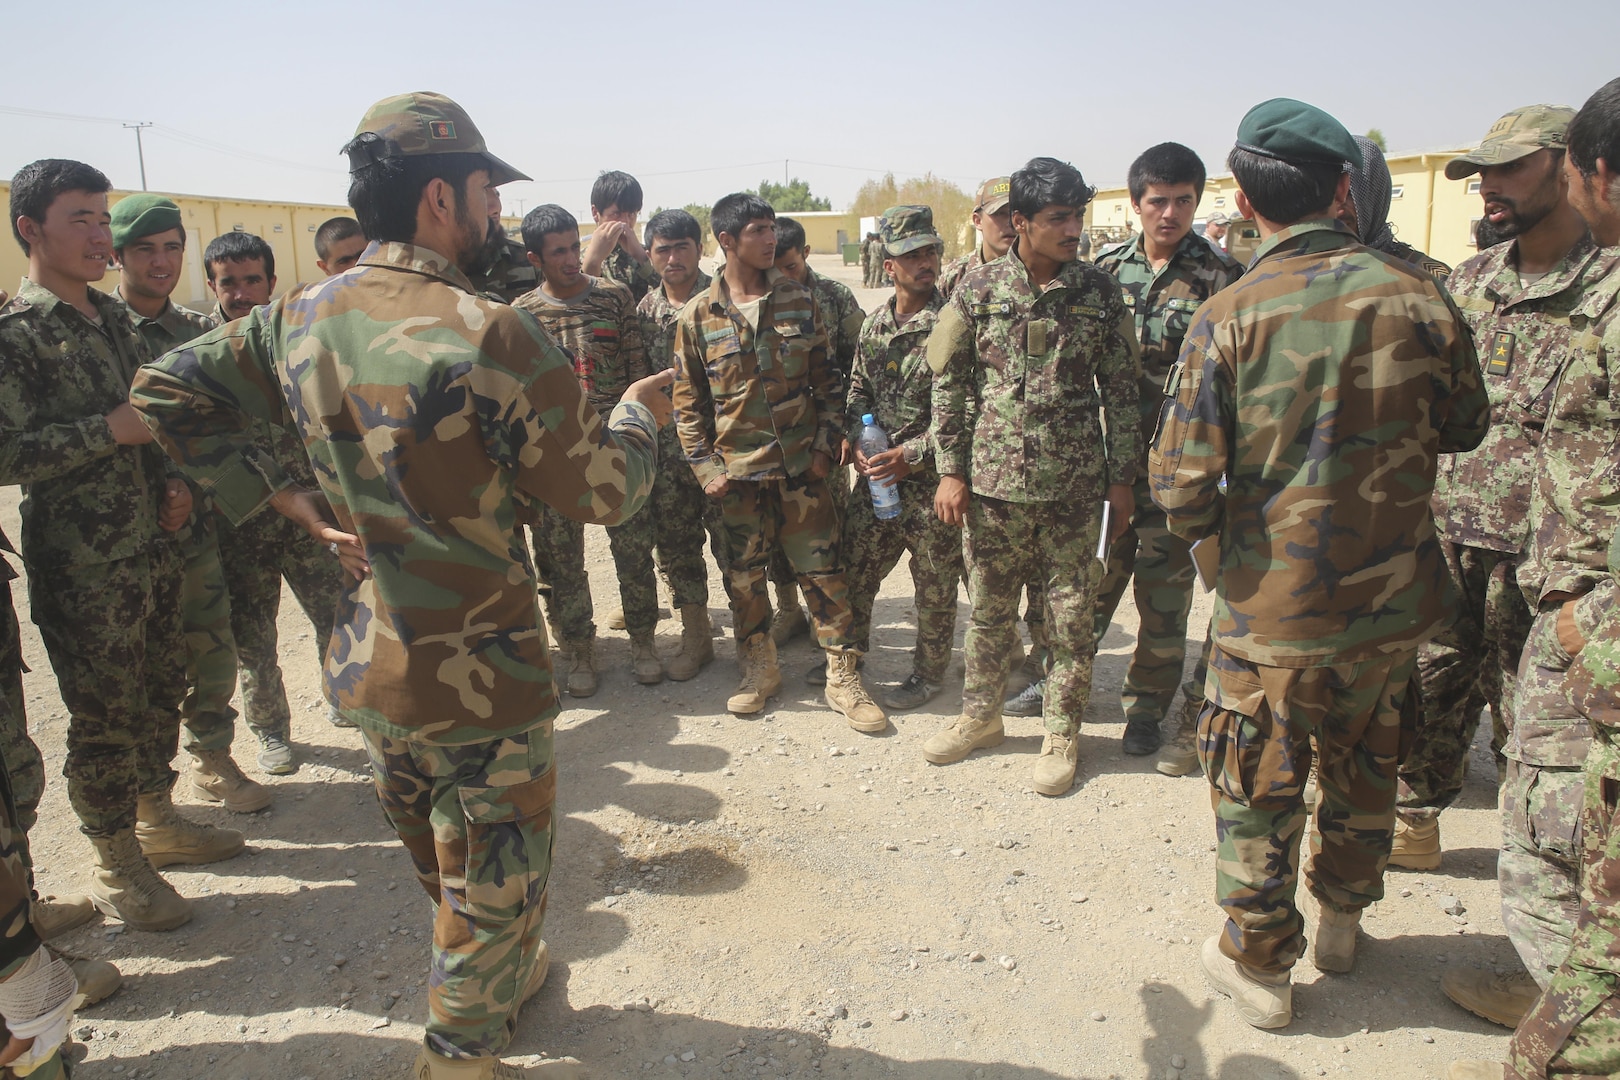 An Afghan National Army soldier with 215th Corps demonstrates disturbed earth patterns, a possible indicator of an improvised explosive device, at Camp Shorabak, Afghanistan, July 13, 2017. Approximately 70 soldiers with various units from 215th Corps recently began a route clearance course, which instructs students on proper counter IED procedures, helping to promote the maneuverability of infantry kandaks, supplies and civilians throughout Helmand Province. (U.S. Marine Corps photo by Sgt. Lucas Hopkins)